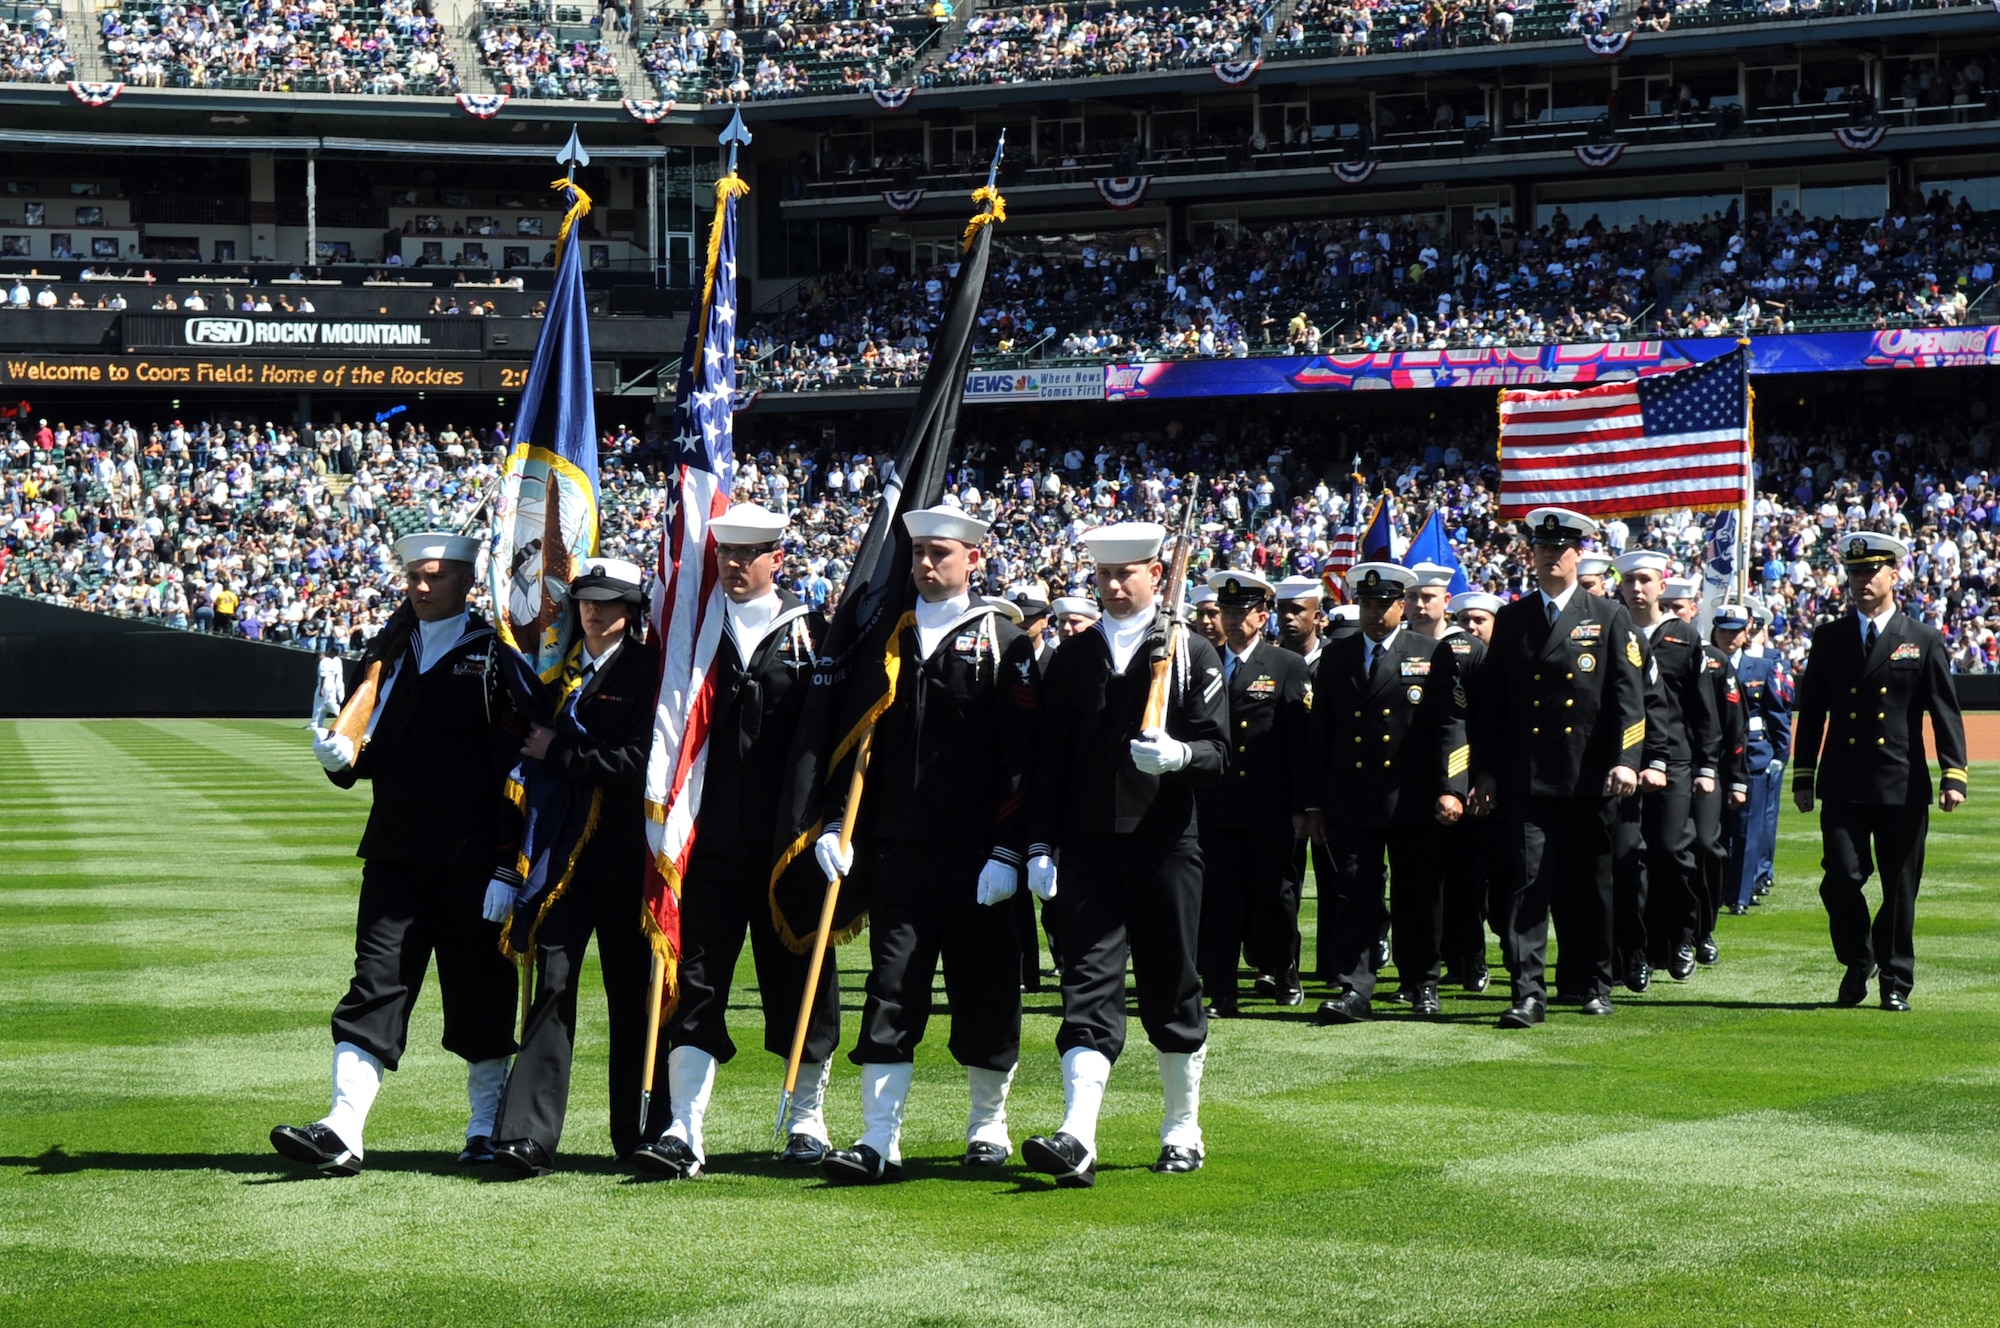 DENVER, Colo. -- Sailors of the Navy Recruiting District Denver and Buckley Air Force Base march with pride from Coors Field and a crowd of 45,509 people April 9. (U.S. Air Force photo by Airman 1st Class Marcy Glass)